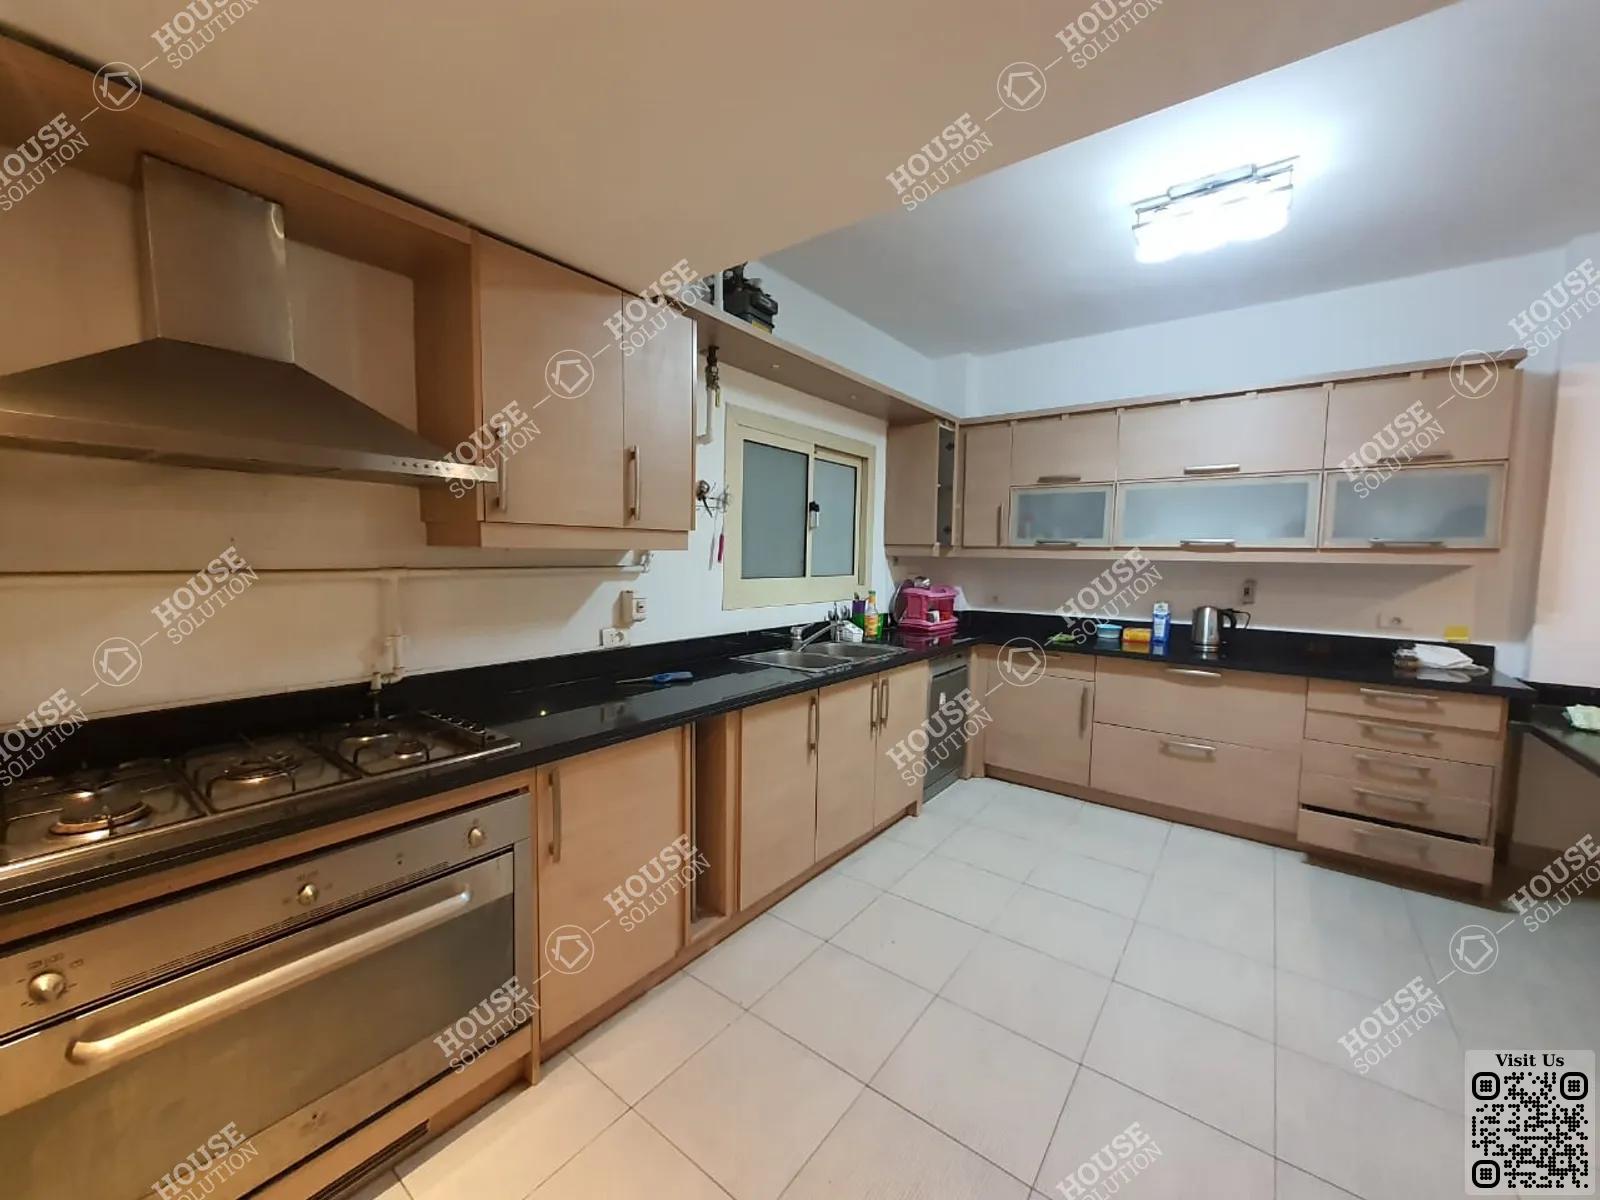 KITCHEN  @ Office spaces For Rent In Maadi Maadi Sarayat Area: 600 m² consists of 6 Bedrooms 4 Bathrooms Semi furnished 5 stars #5526-2